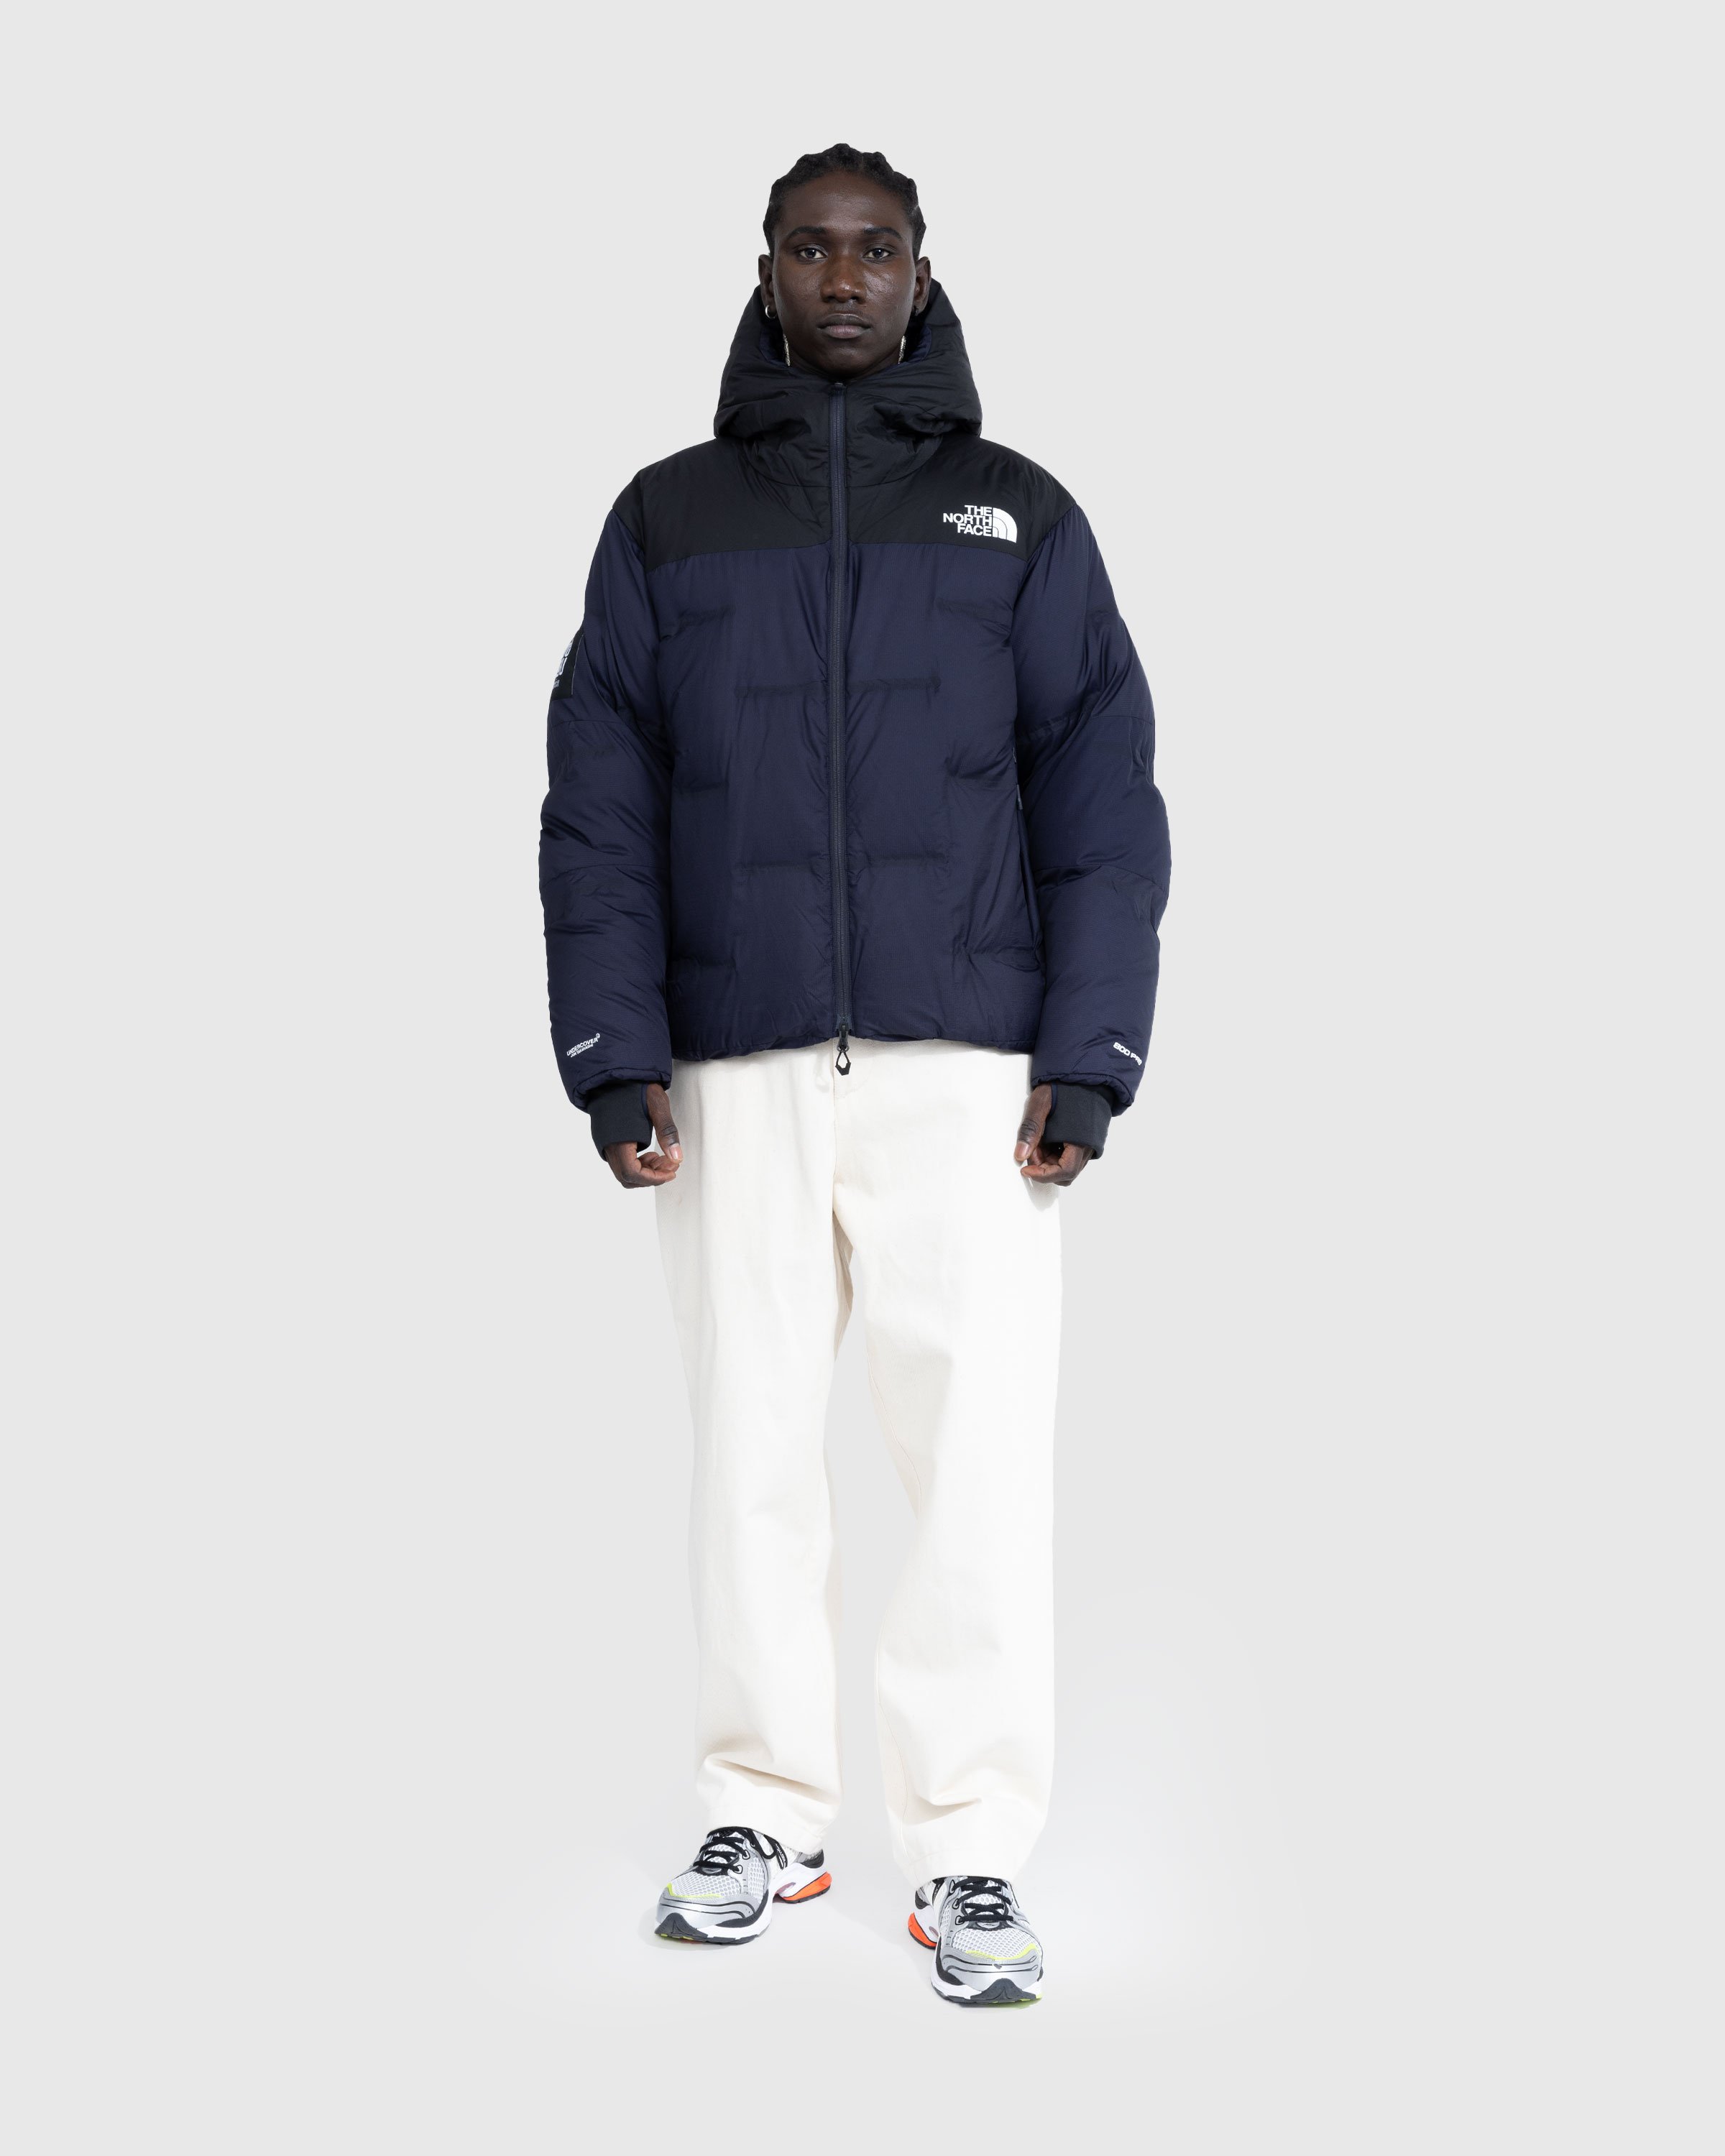 The North Face x UNDERCOVER - Soukuu Cloud Down Nupste Parka Black/Navy - Clothing - Multi - Image 3